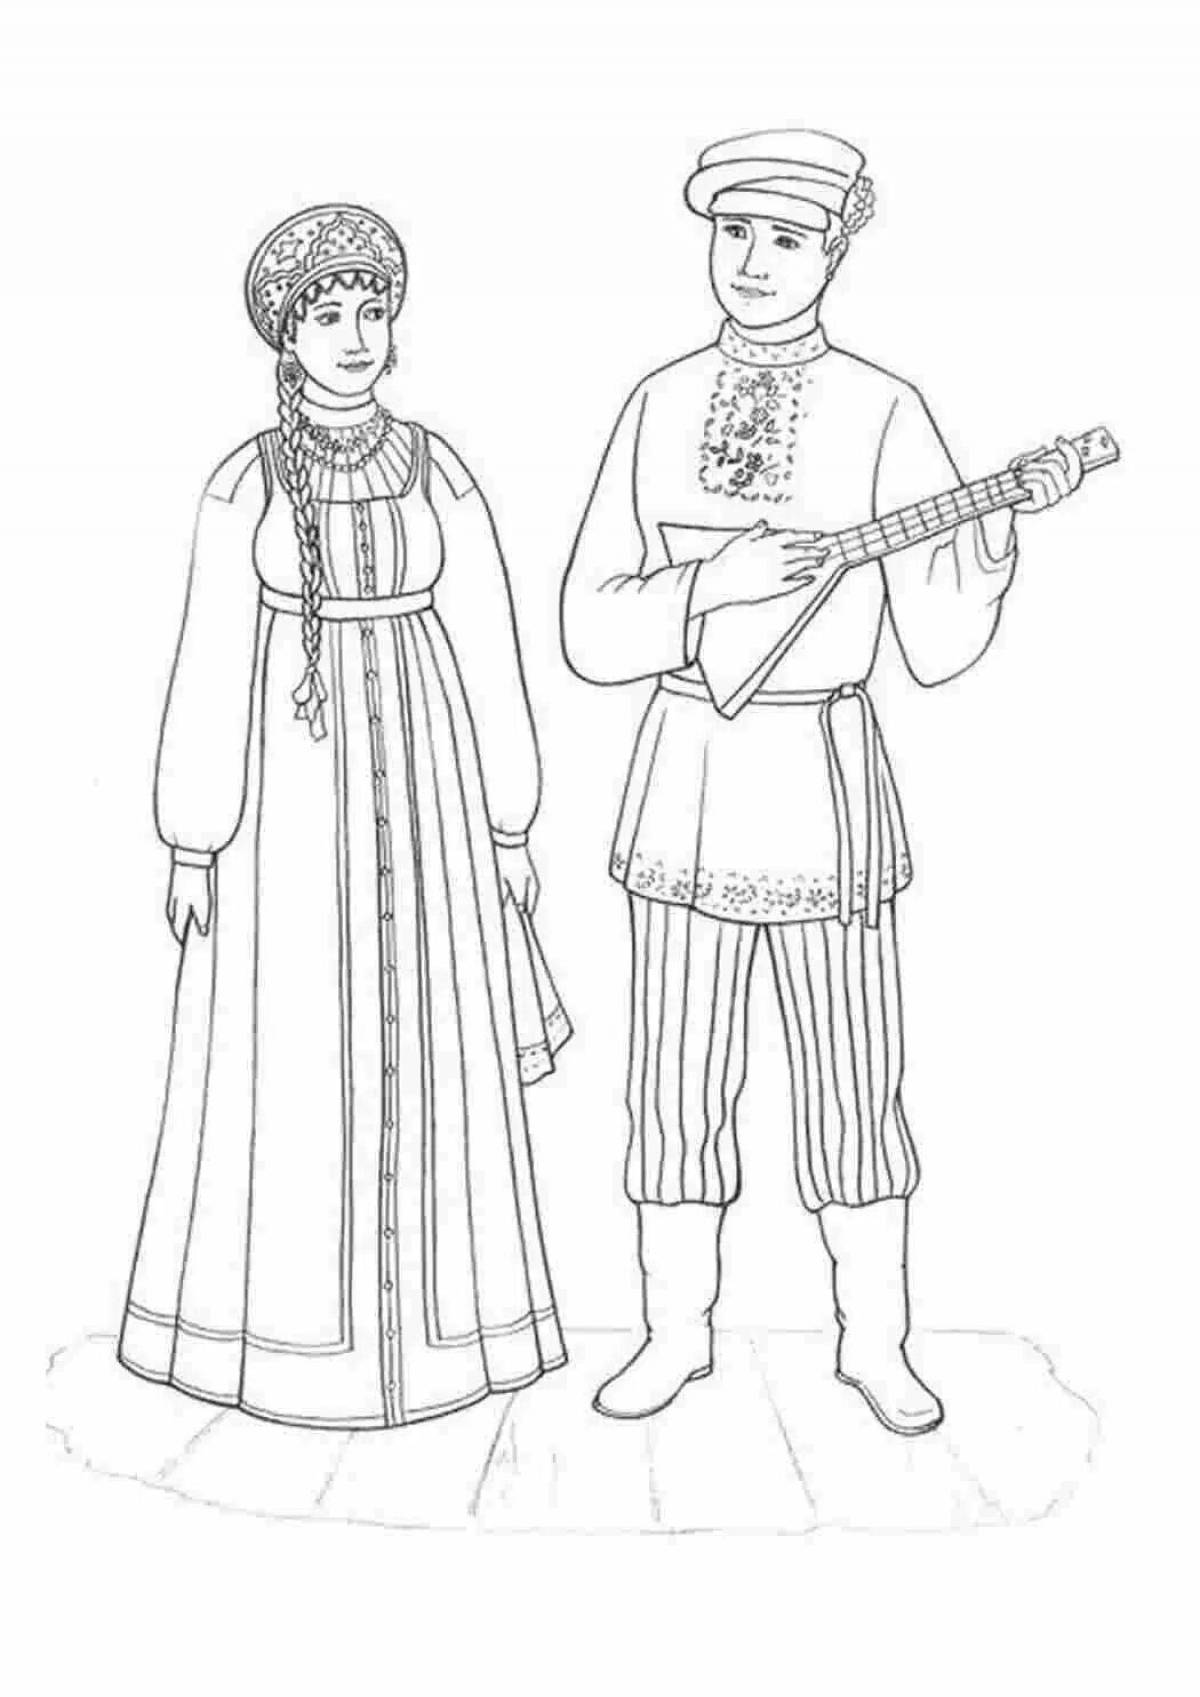 Impressive coloring book of Russian folk clothes for children